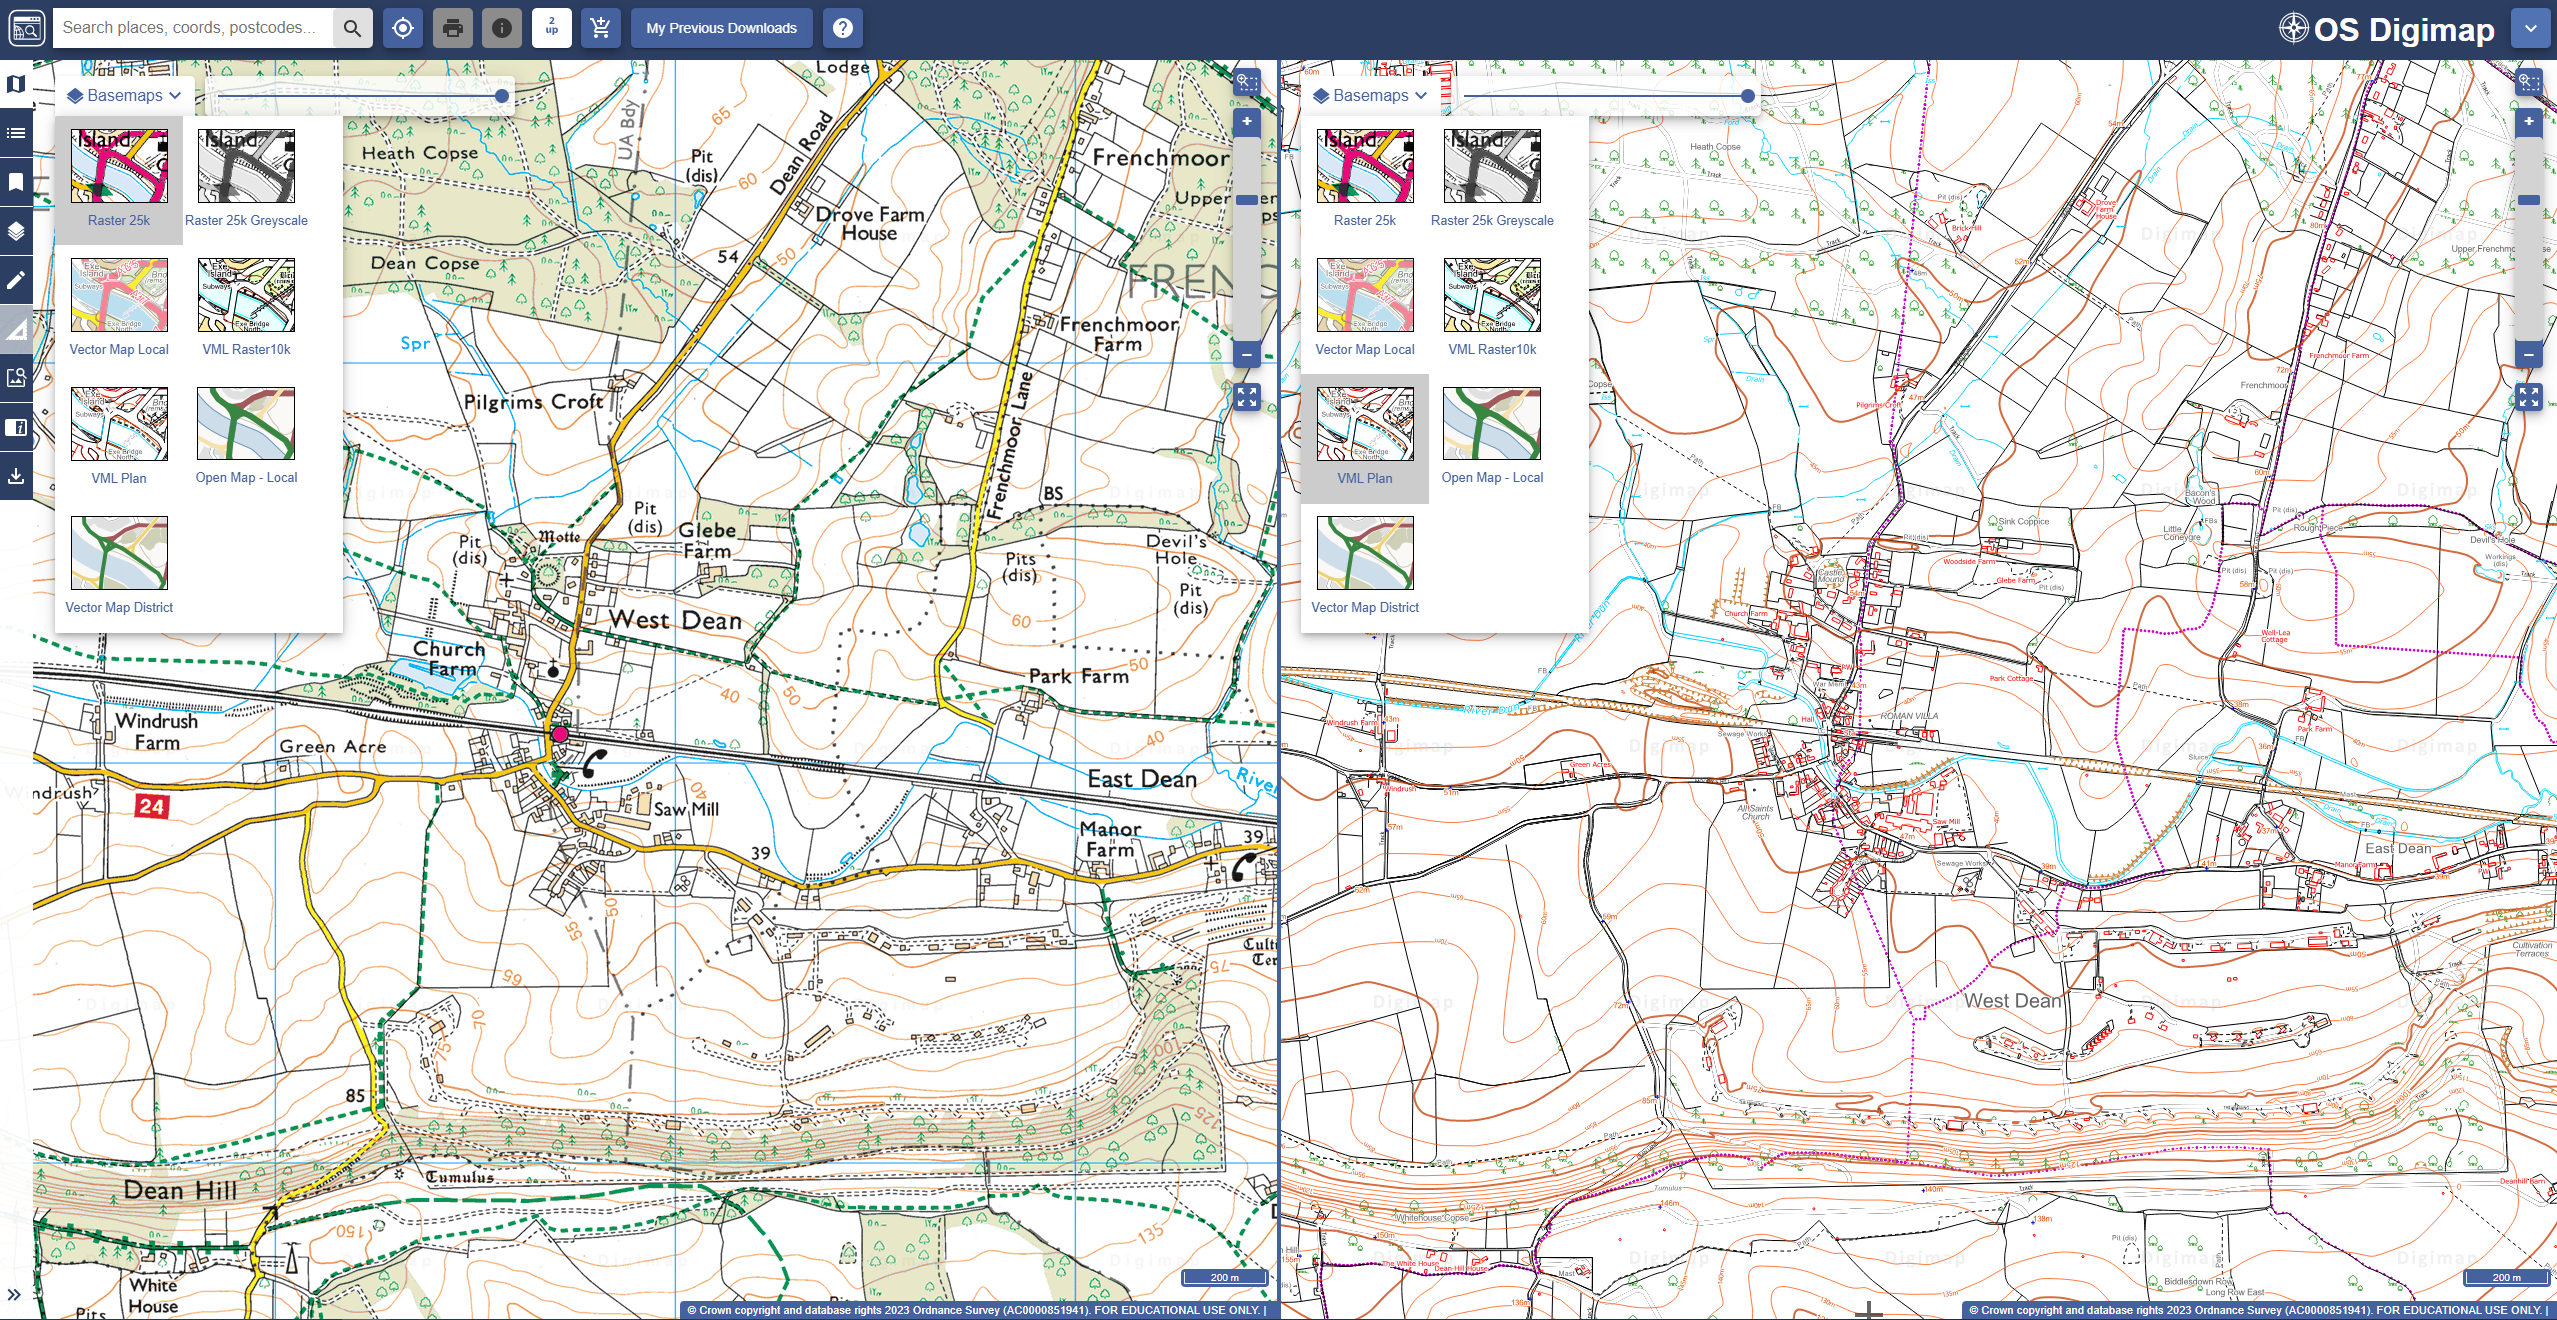 comparison of two basemaps created with Vector Map Local map data